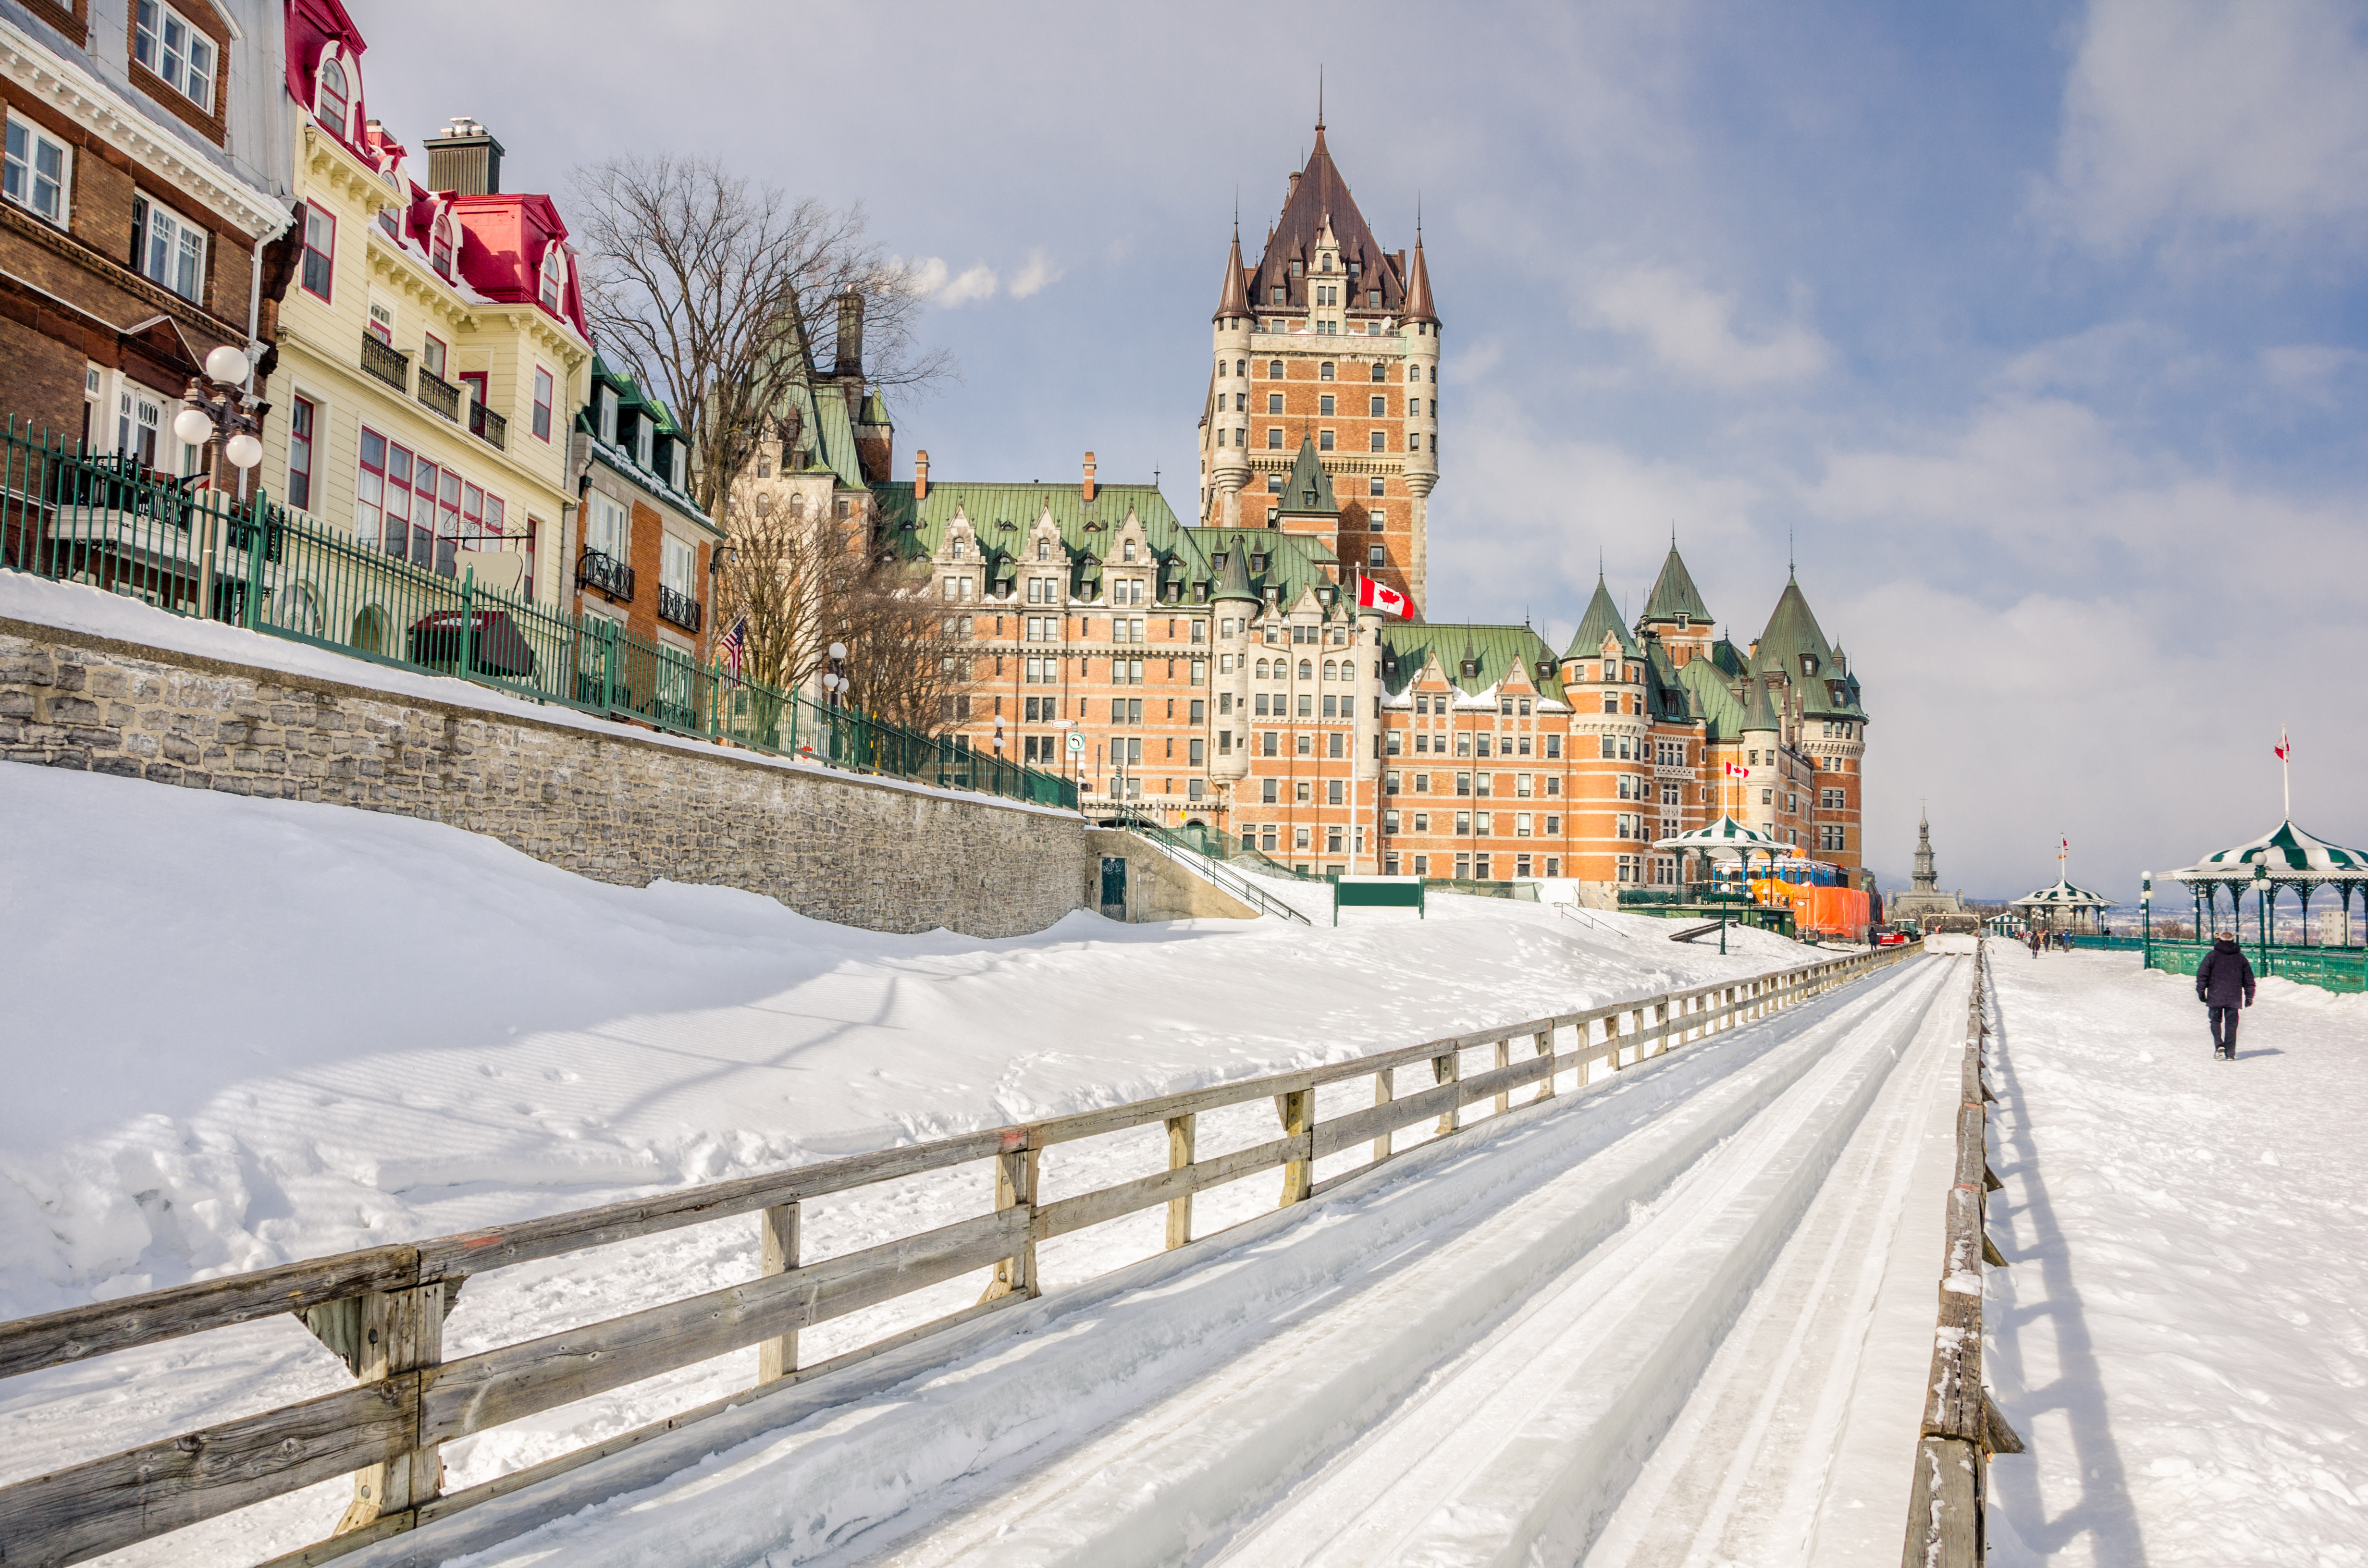 Chateau Frontenac in Winter